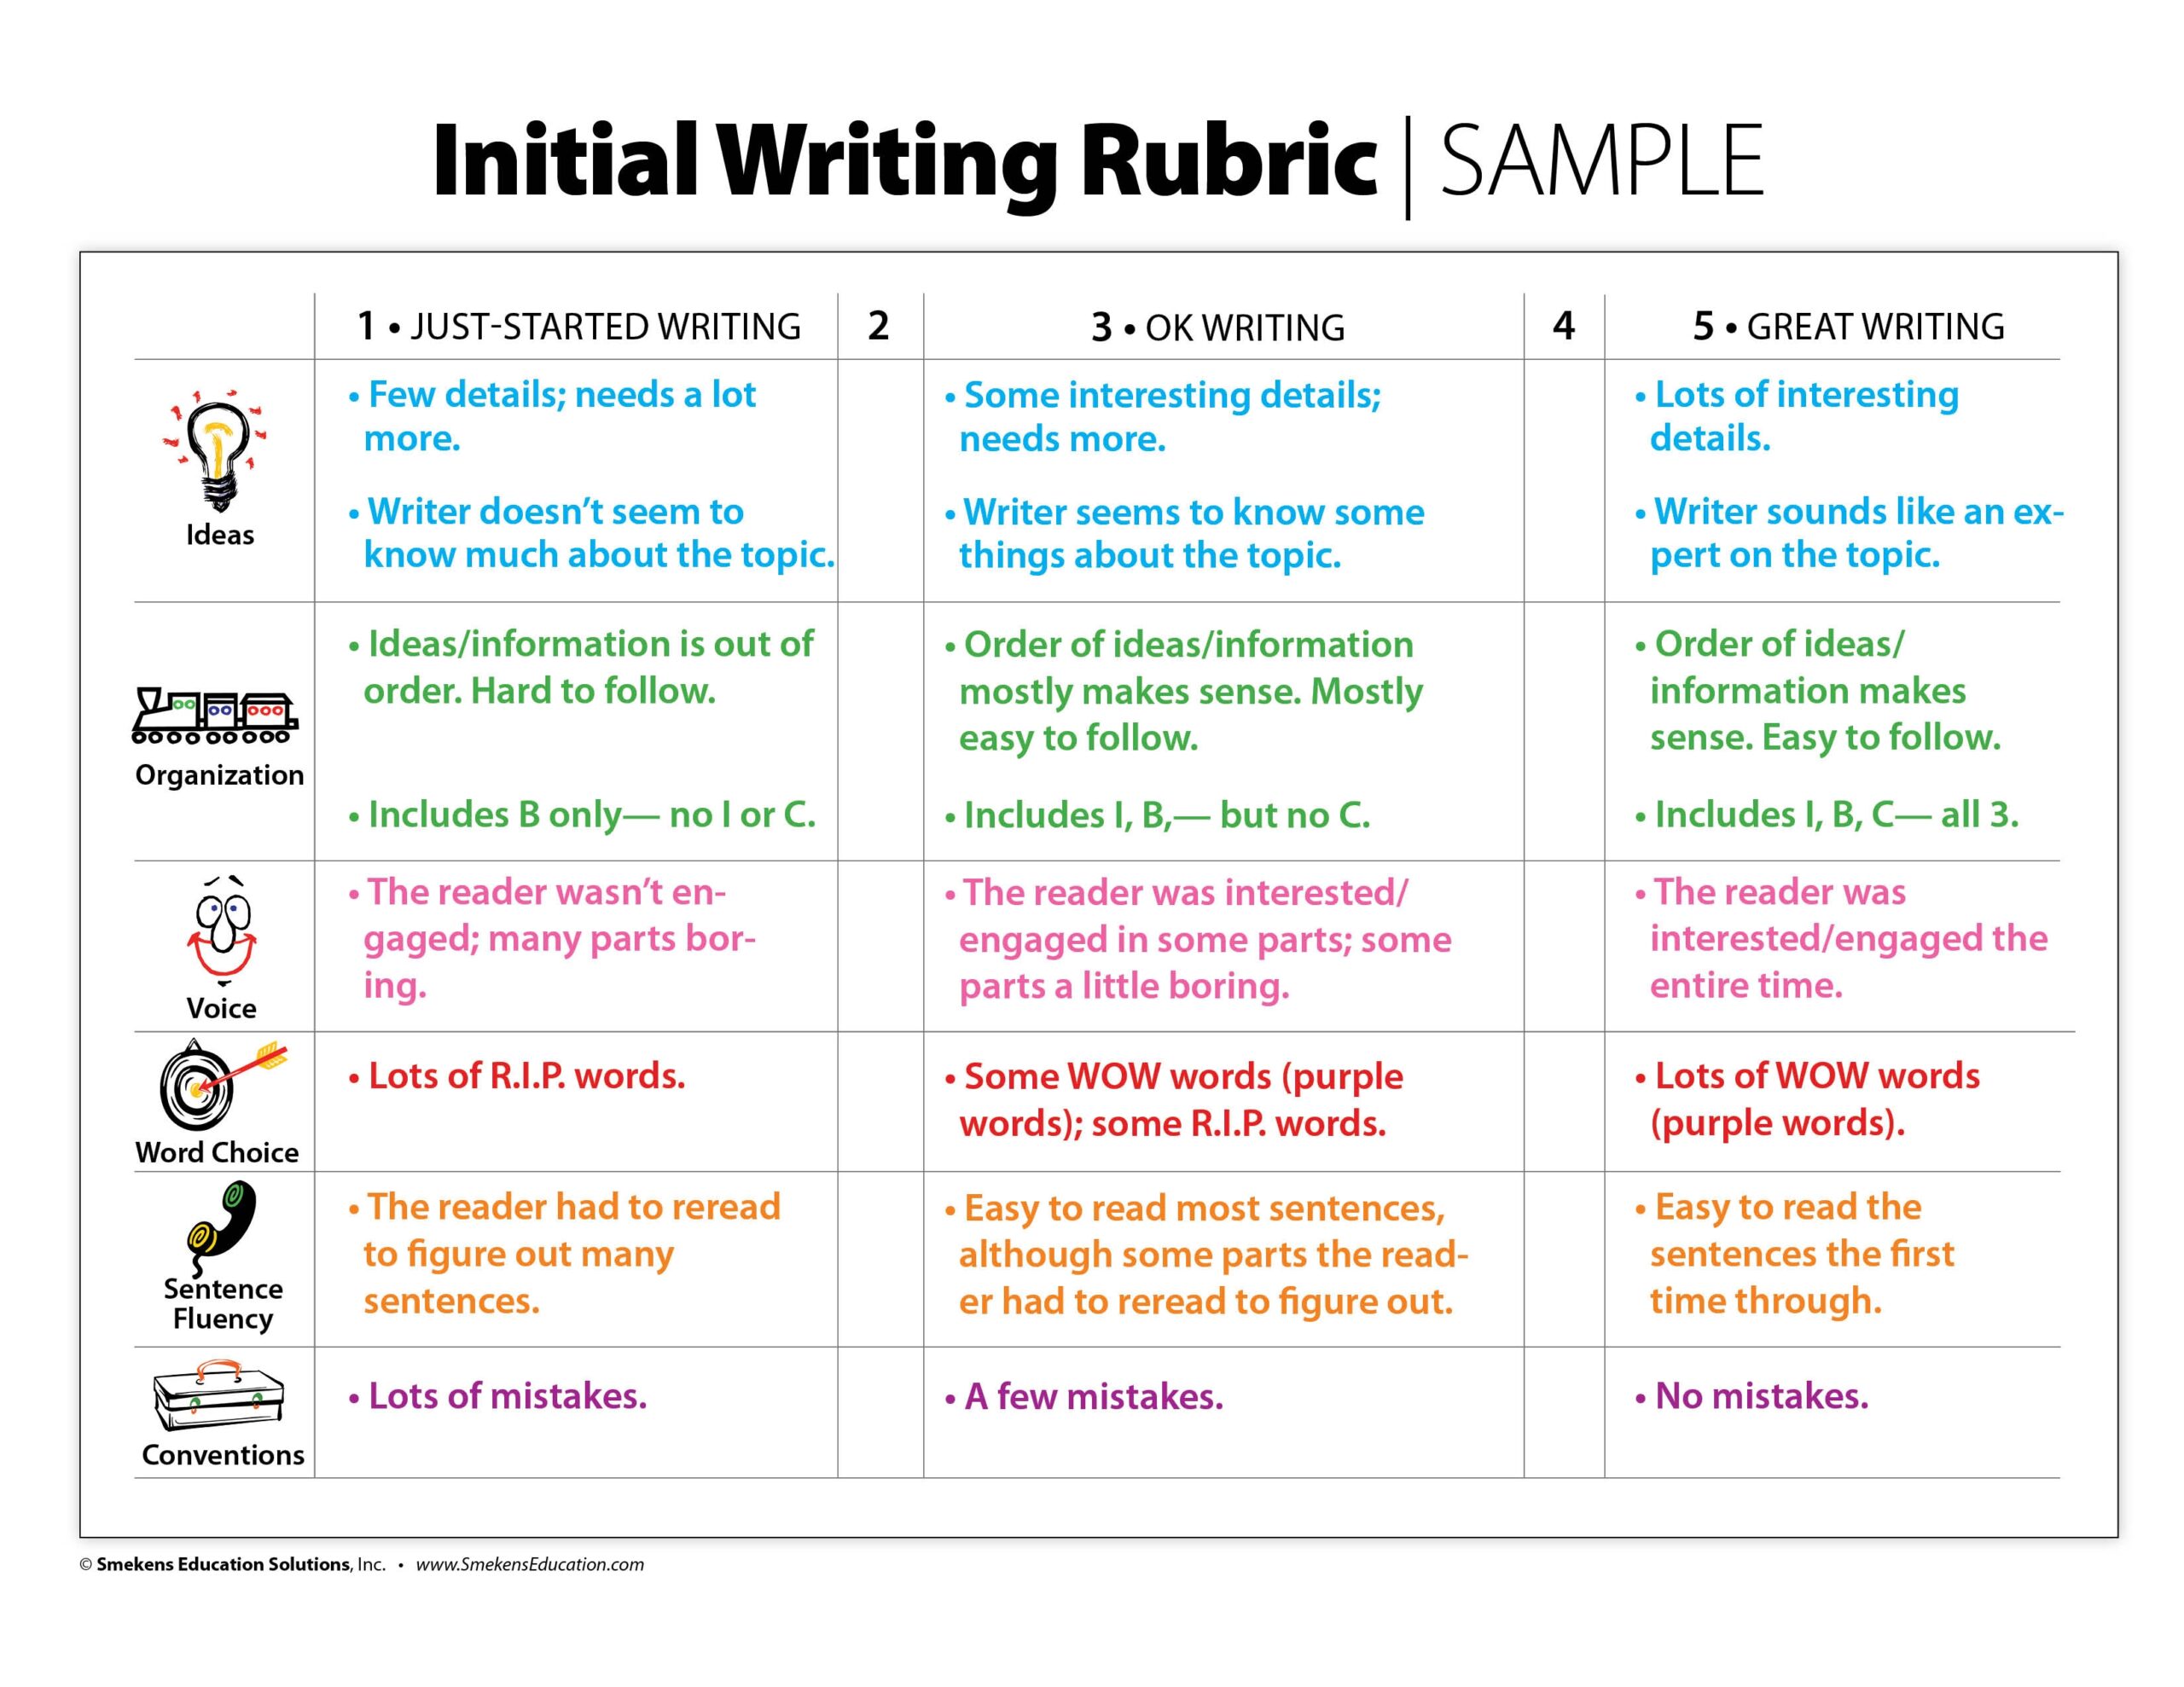 Sample Initial Writing Rubric - Color-Coded for the 6 Traits of Writing